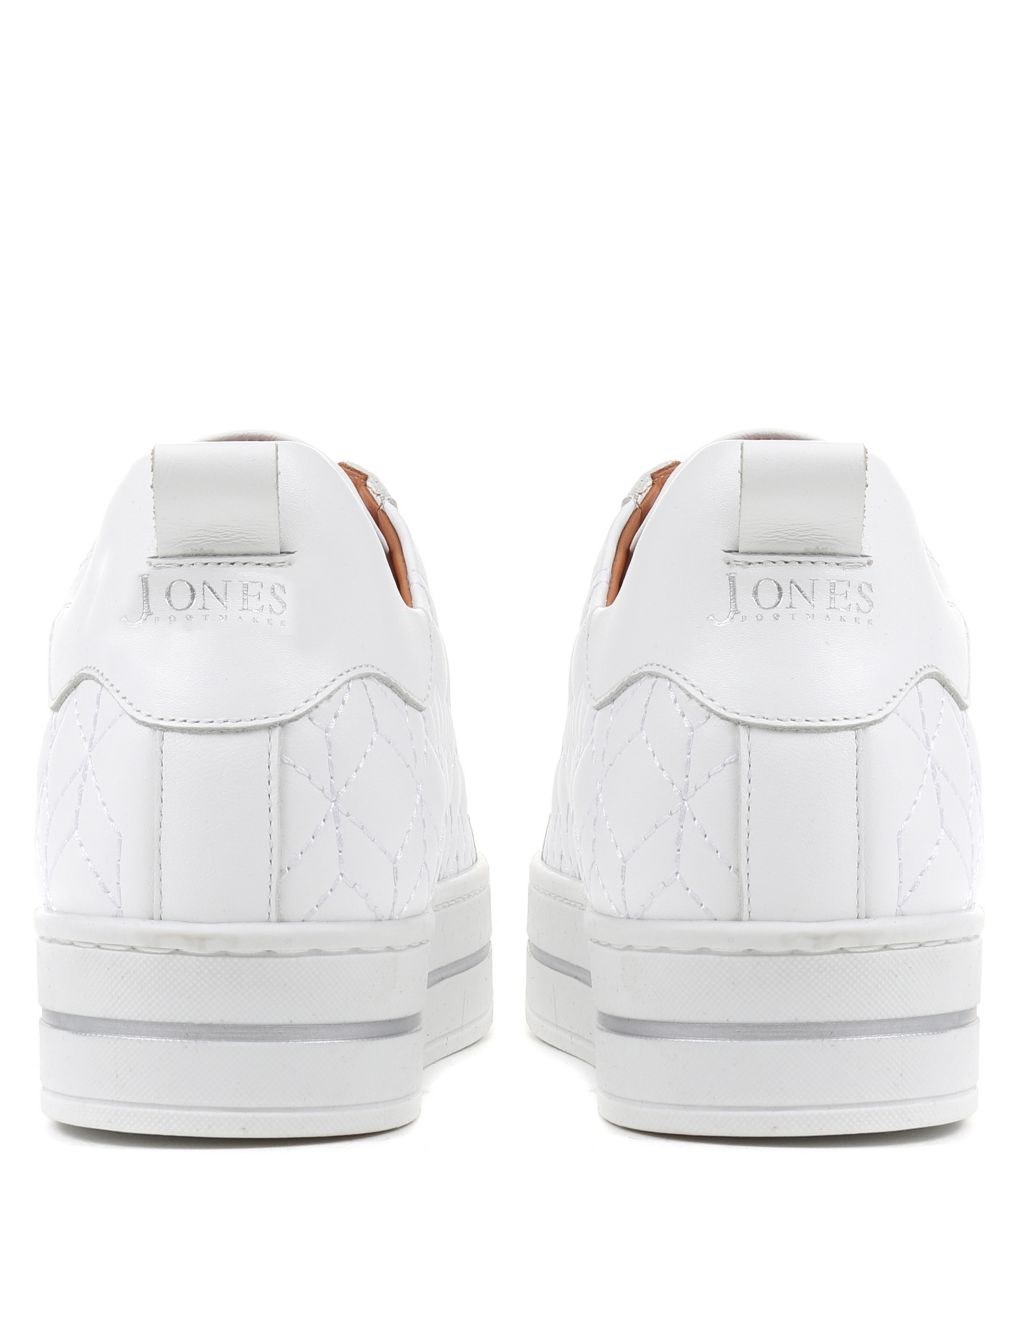 Leather Lace Up Chunky Trainers image 6